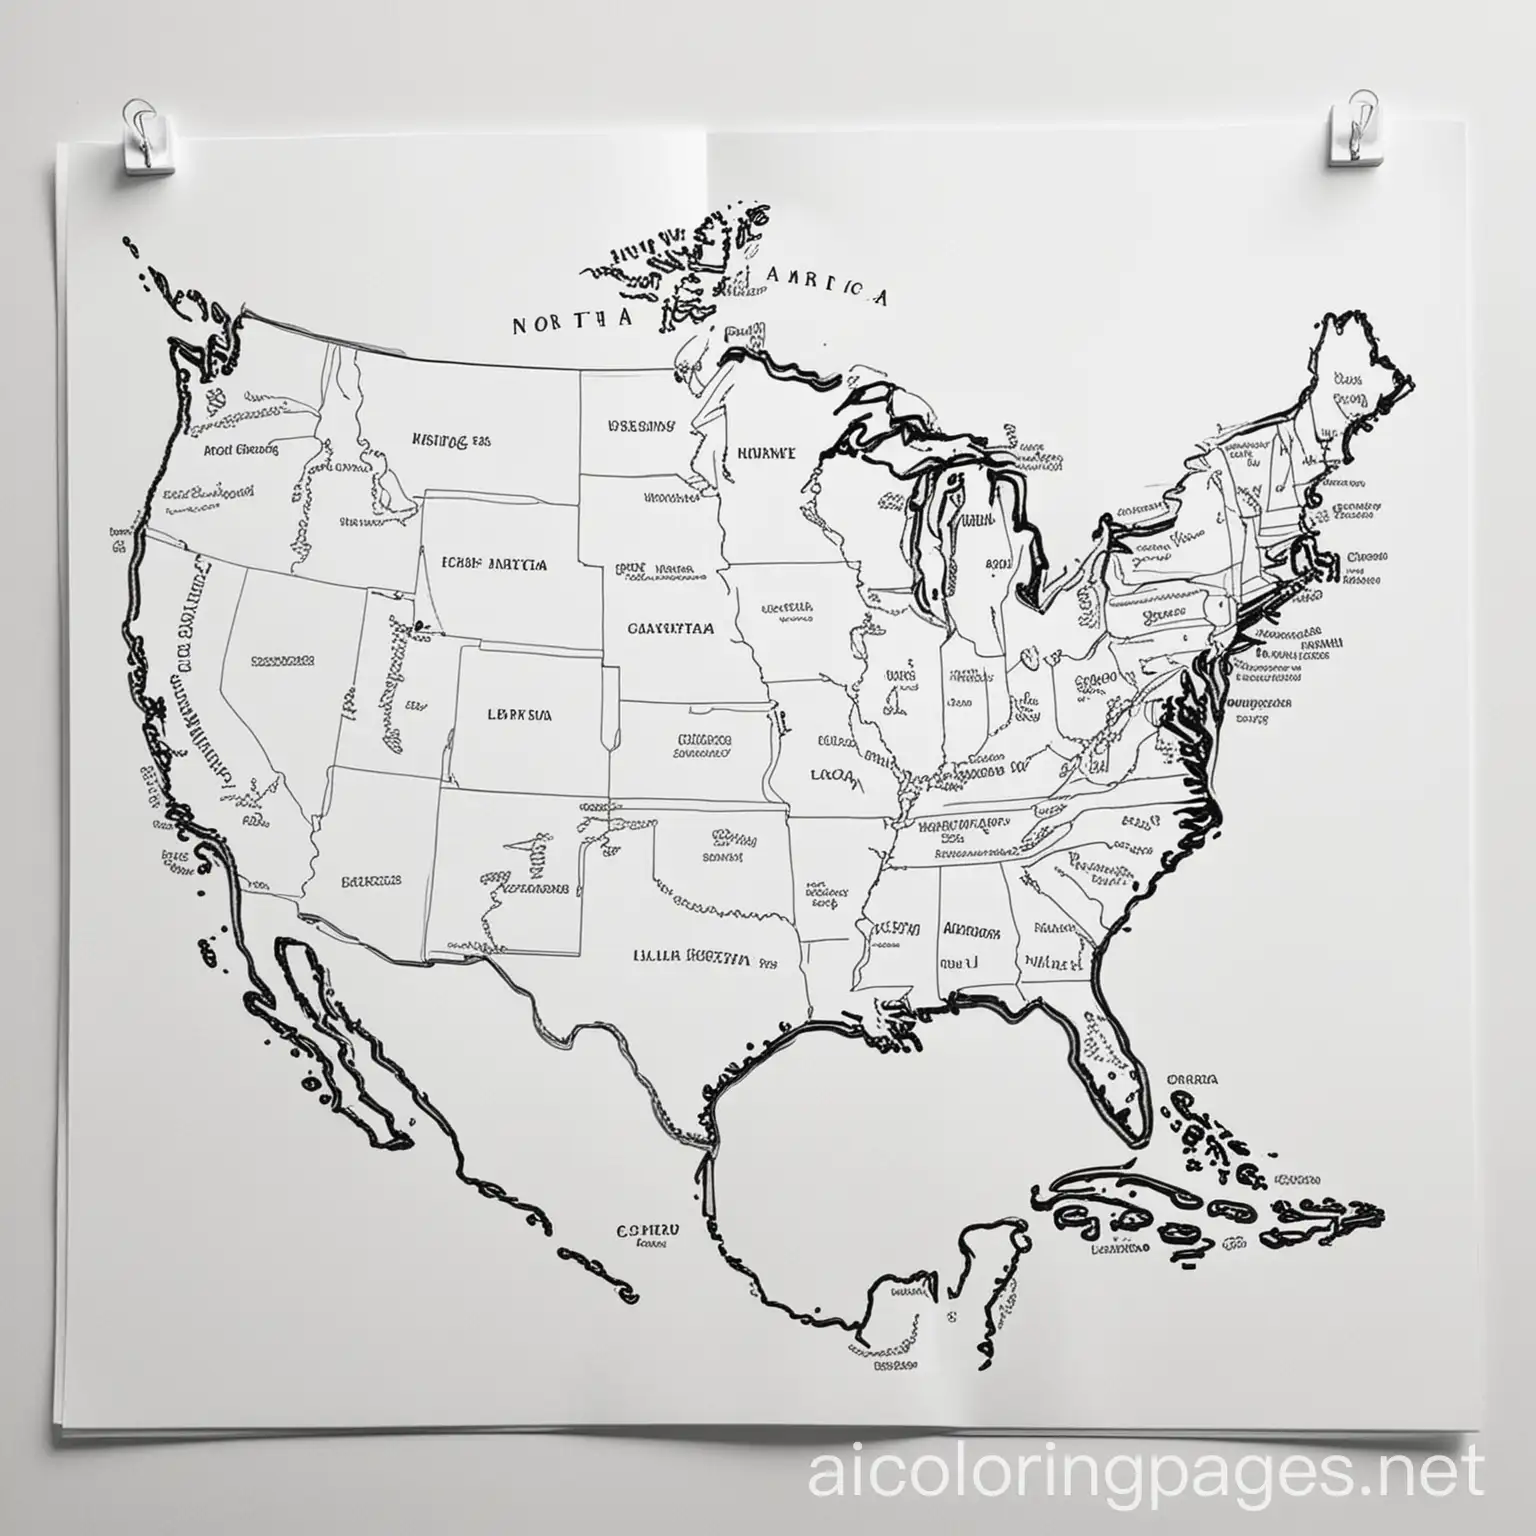 simple map of north america with 10 simple landmarks no writing only clear pictures
, Coloring Page, black and white, line art, white background, Simplicity, Ample White Space. The background of the coloring page is plain white to make it easy for young children to color within the lines. The outlines of all the subjects are easy to distinguish, making it simple for kids to color without too much difficulty